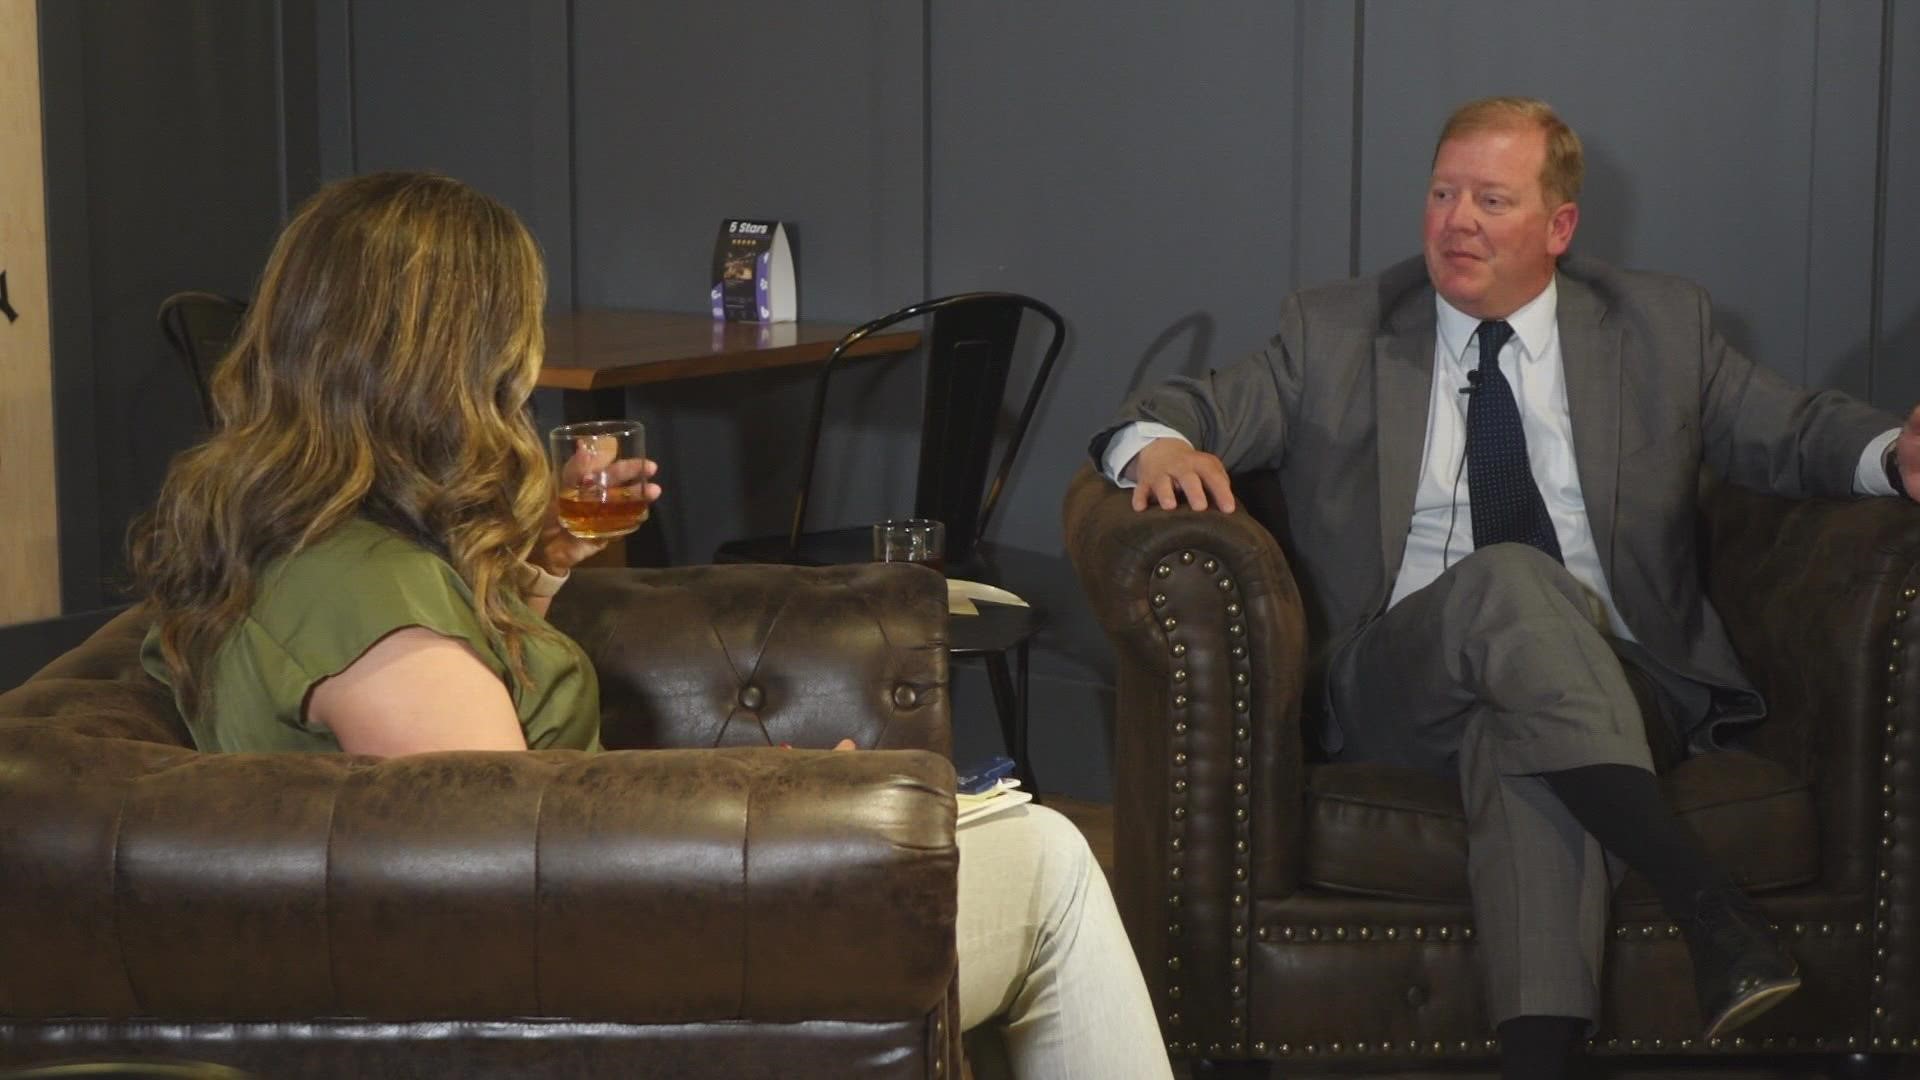 John Nowels spoke with KREM 2's Amanda Roley over tea about why voters should elect him to be the next Spokane County sheriff.